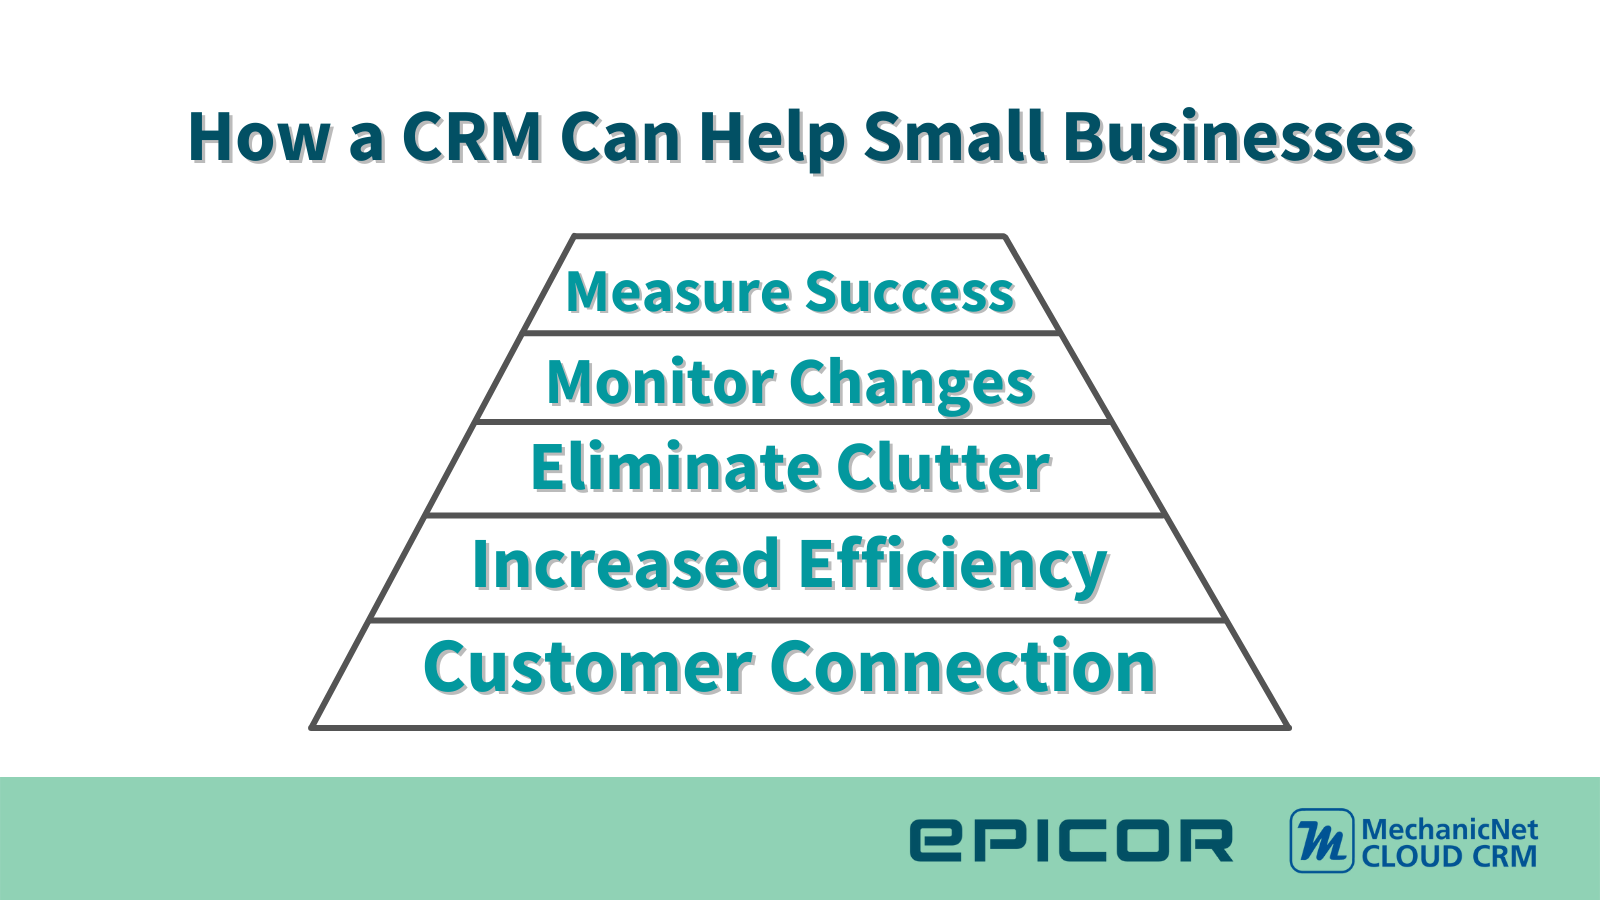 How a CRM Can Help Small Businesses: Measure success, monitor changes, eliminate clutter, increase efficiency, customer connection